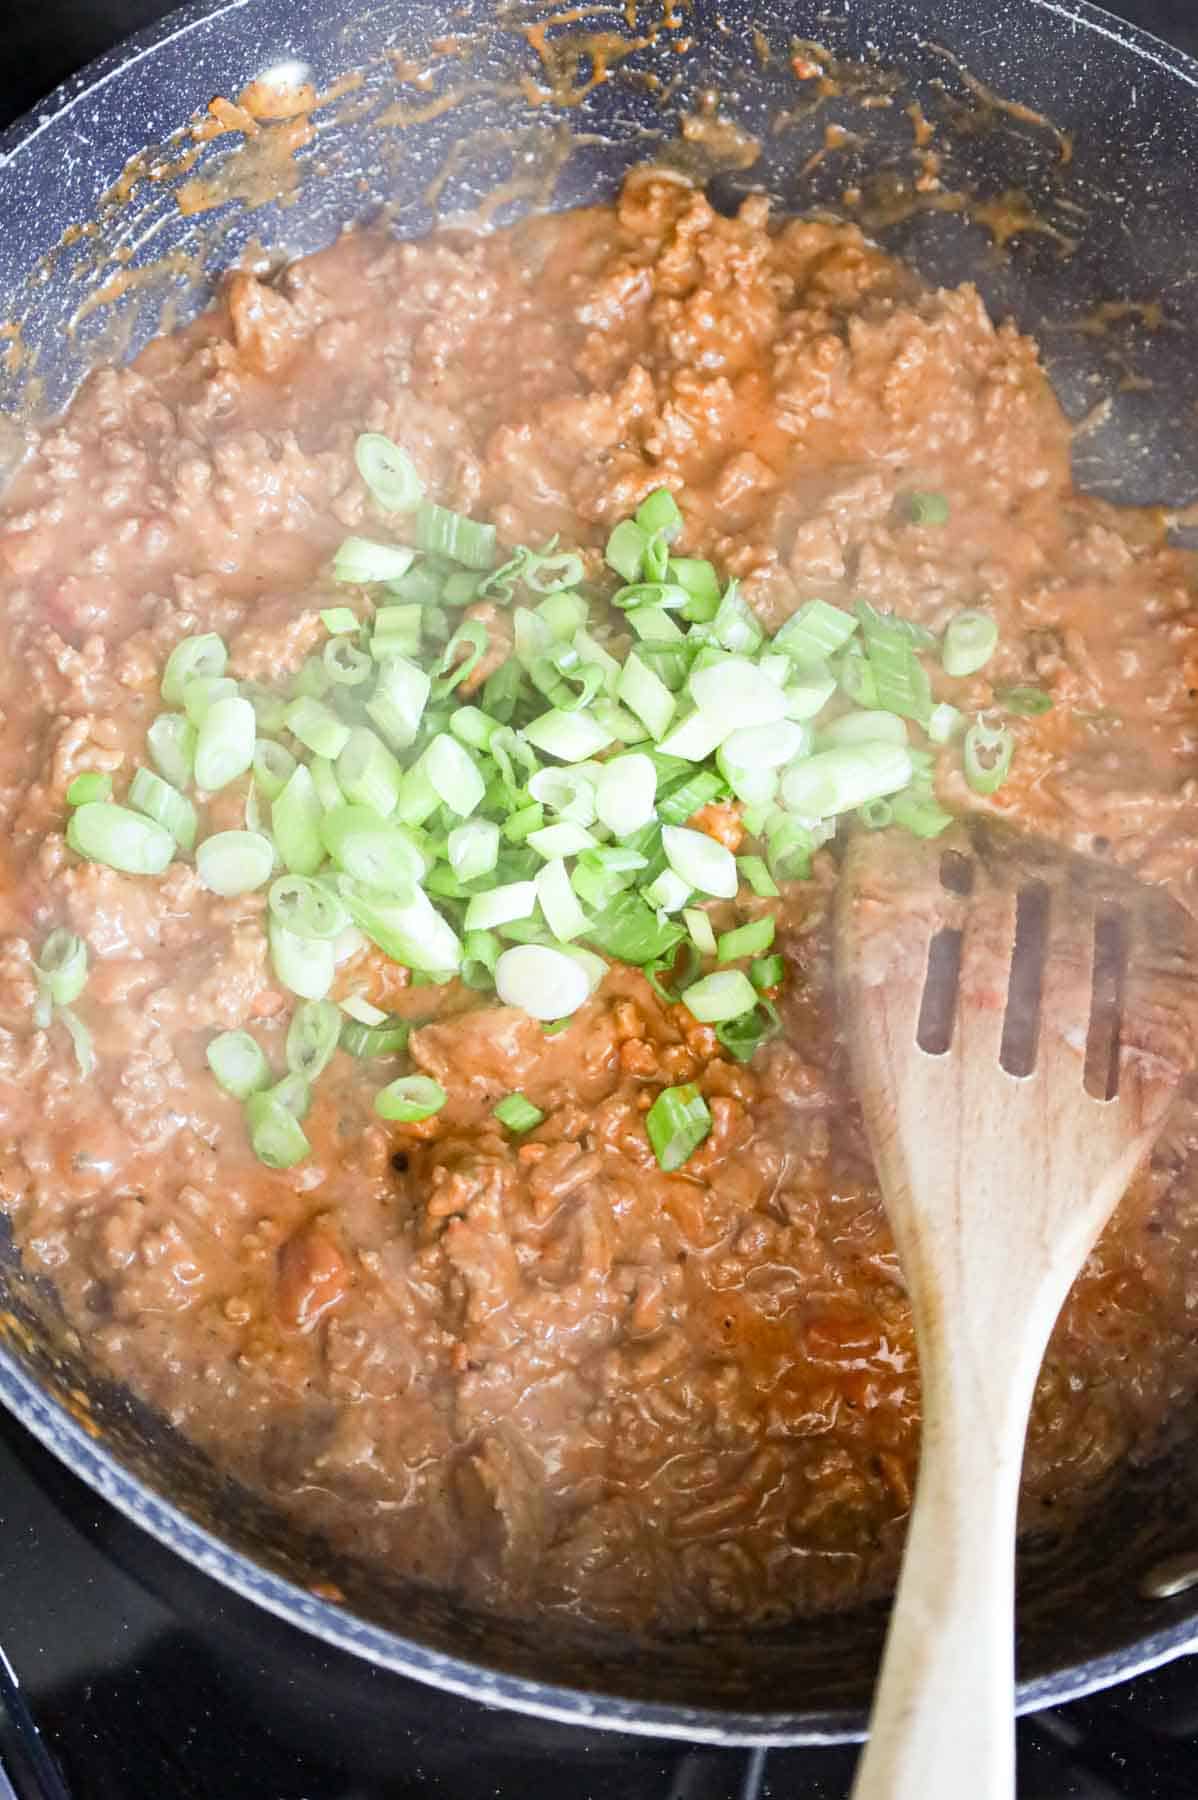 chopped green onions on top of ground beef taco mixture in a skillet